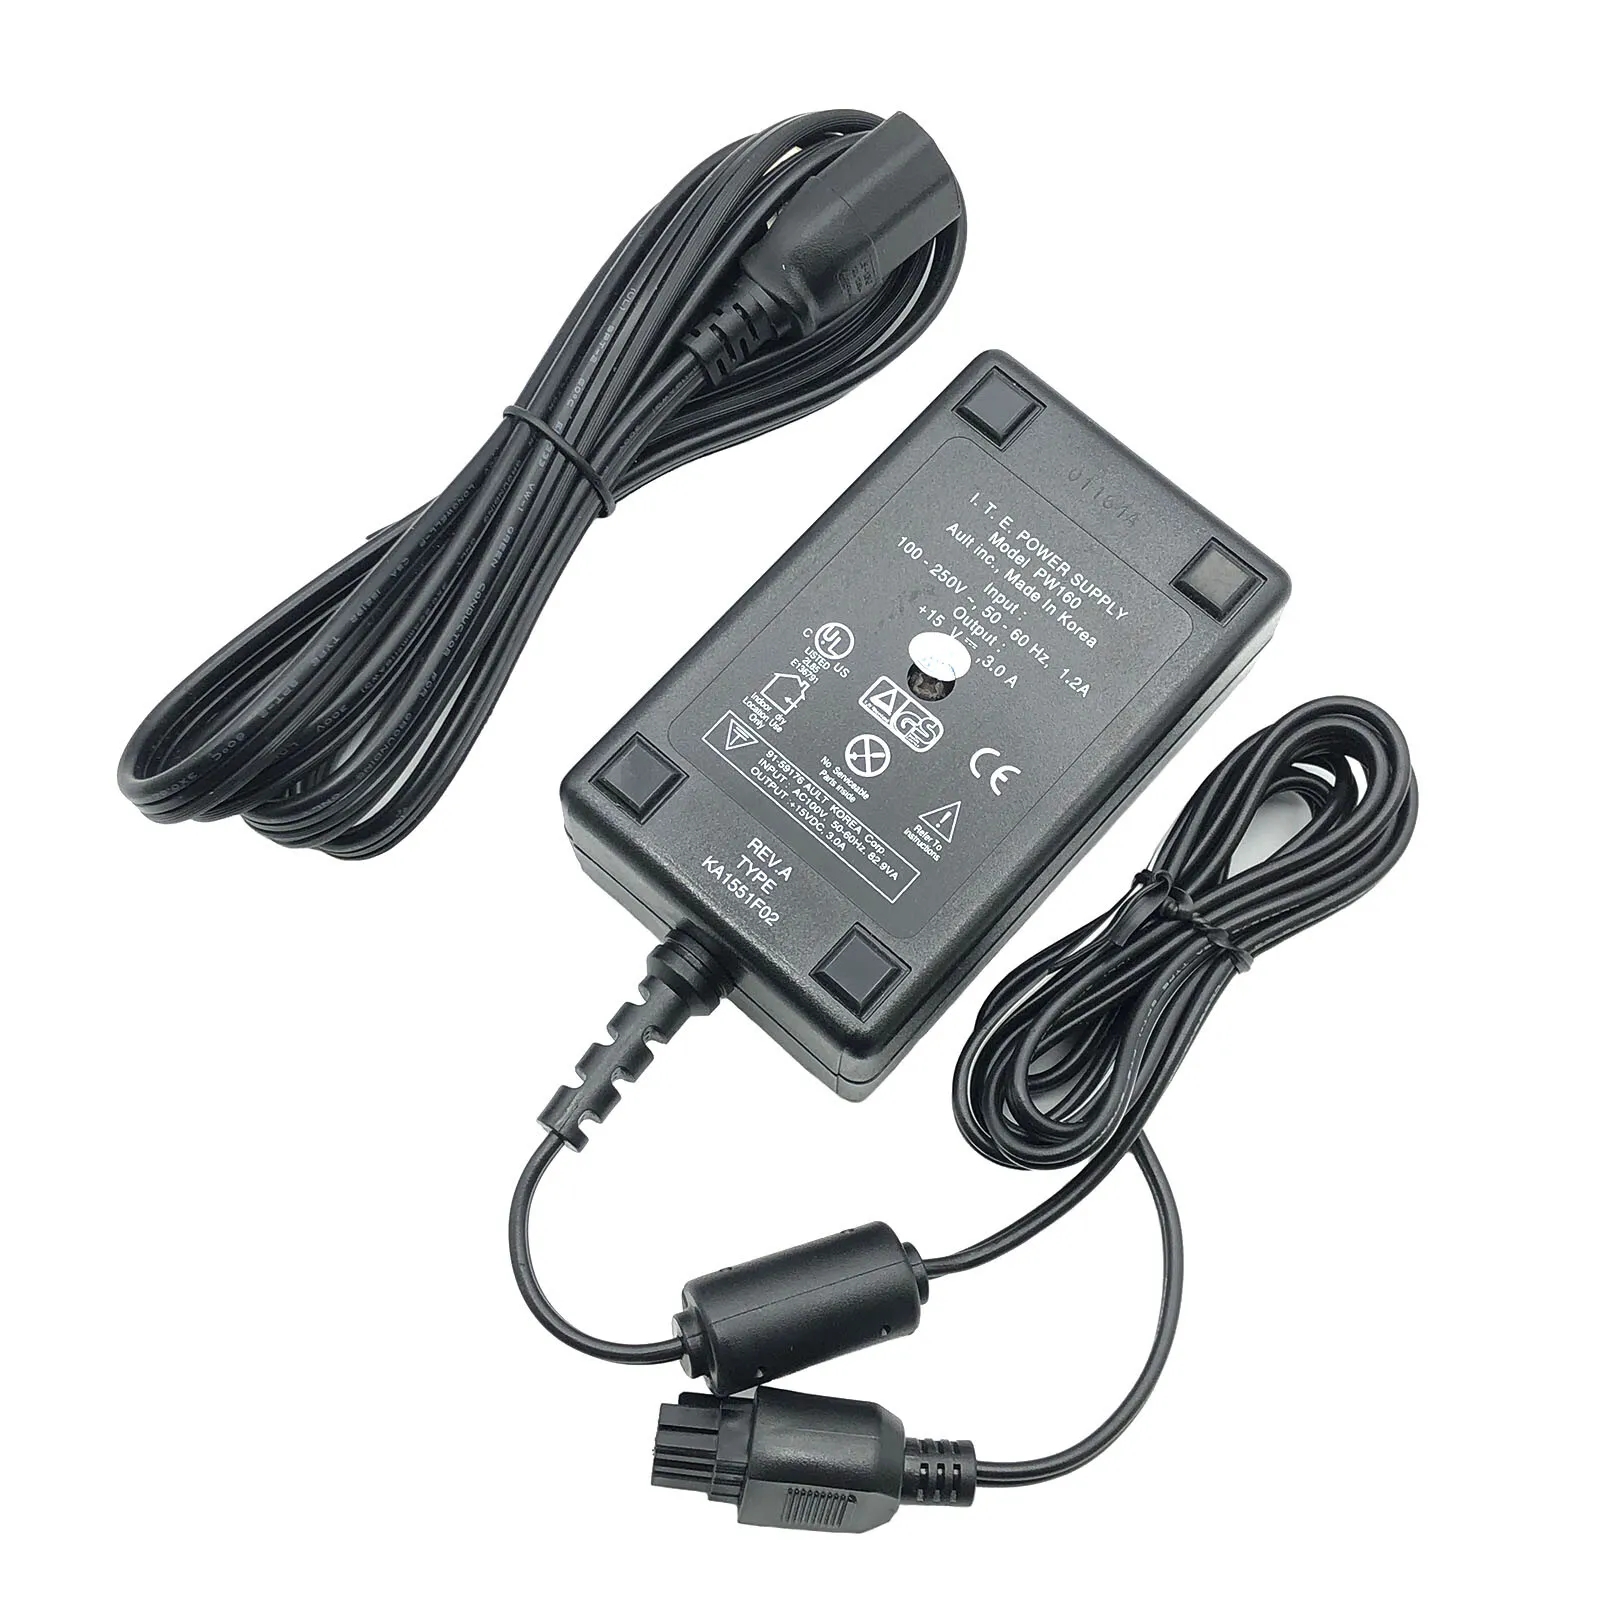 *Brand NEW*Genuine PW160 KA1551F02 Ault PW160 15V 3A AC-DC Adapter6-Pin with Cord Power Supply